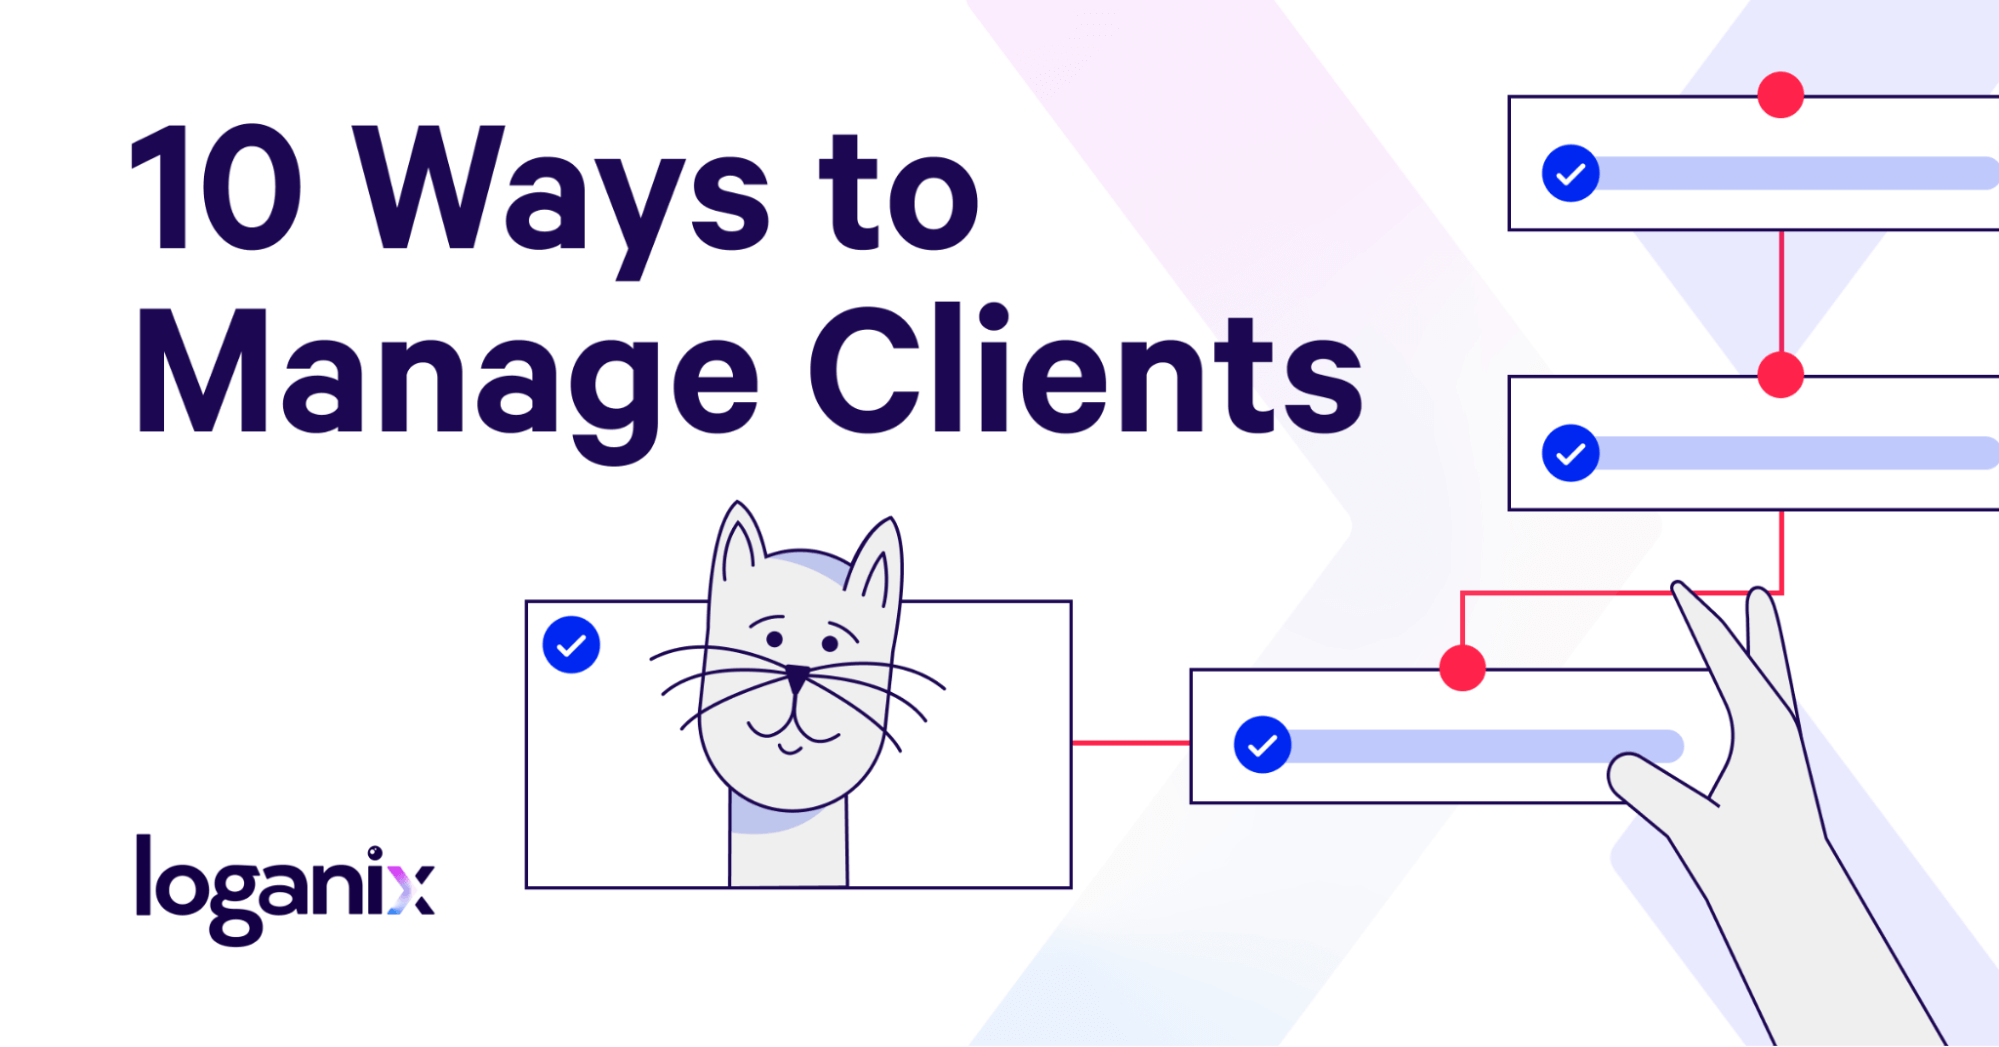 10 Ways to Manage Clients to Keep Them Happy